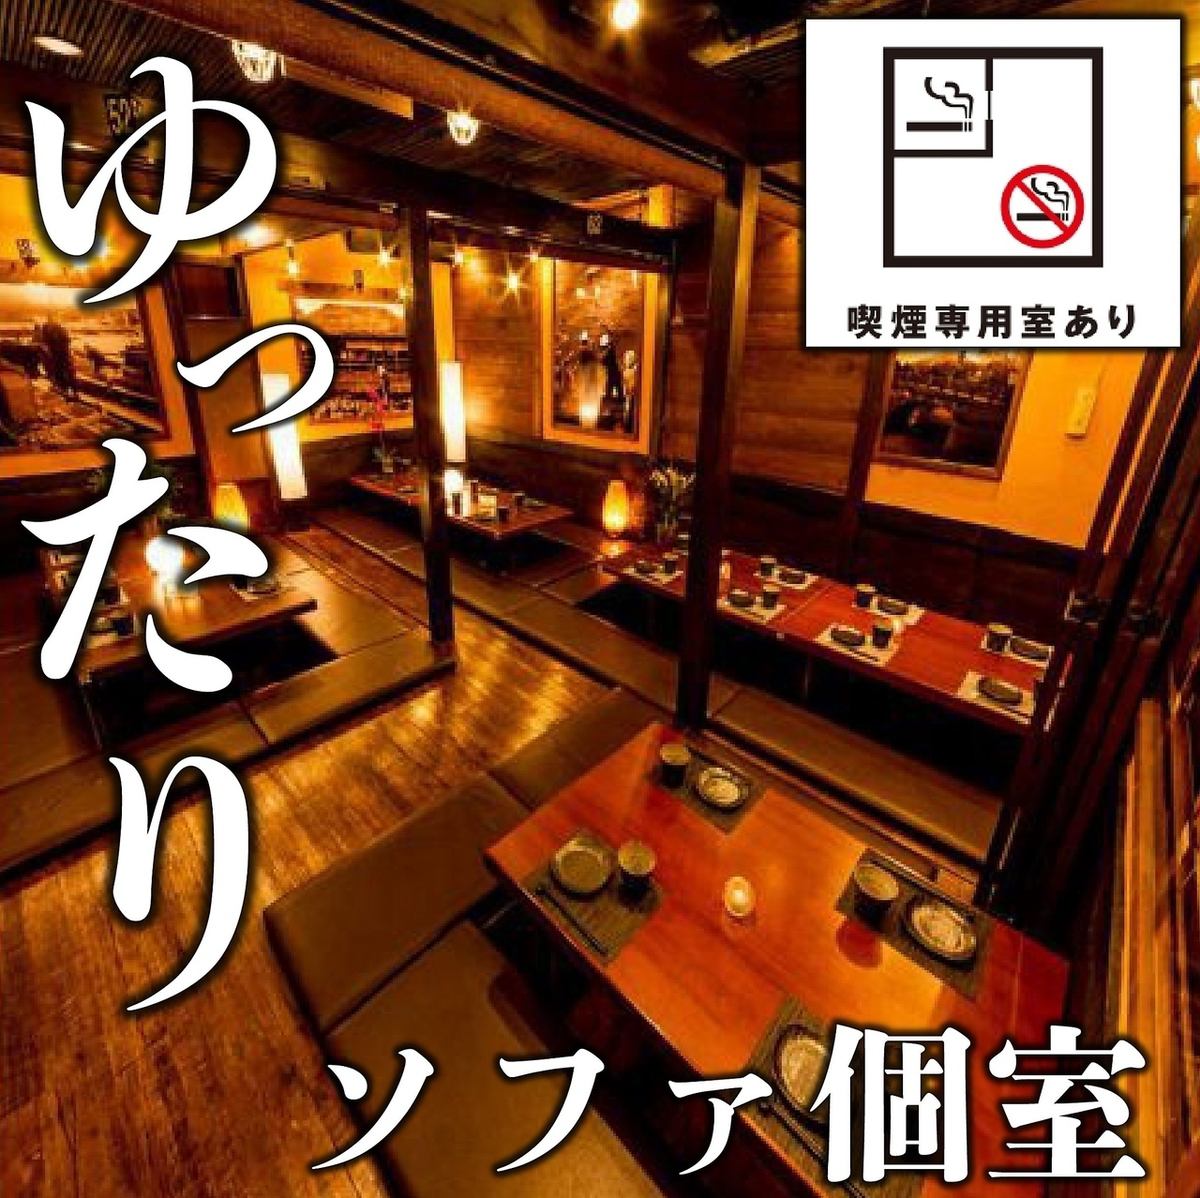 3 minutes walk from Ueno Station ◆ Private room for groups ◆ We can also handle banquets for large groups ♪